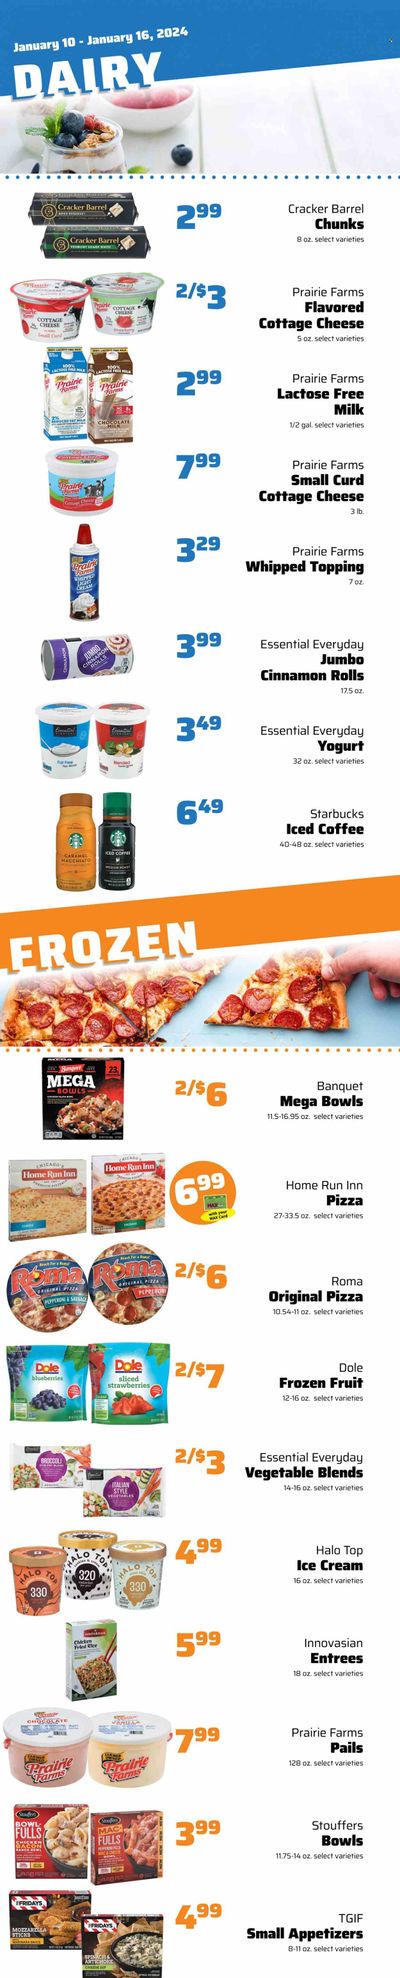 County Market (IL, IN, MO) Weekly Ad Flyer Specials January 10 to January 16, 2024